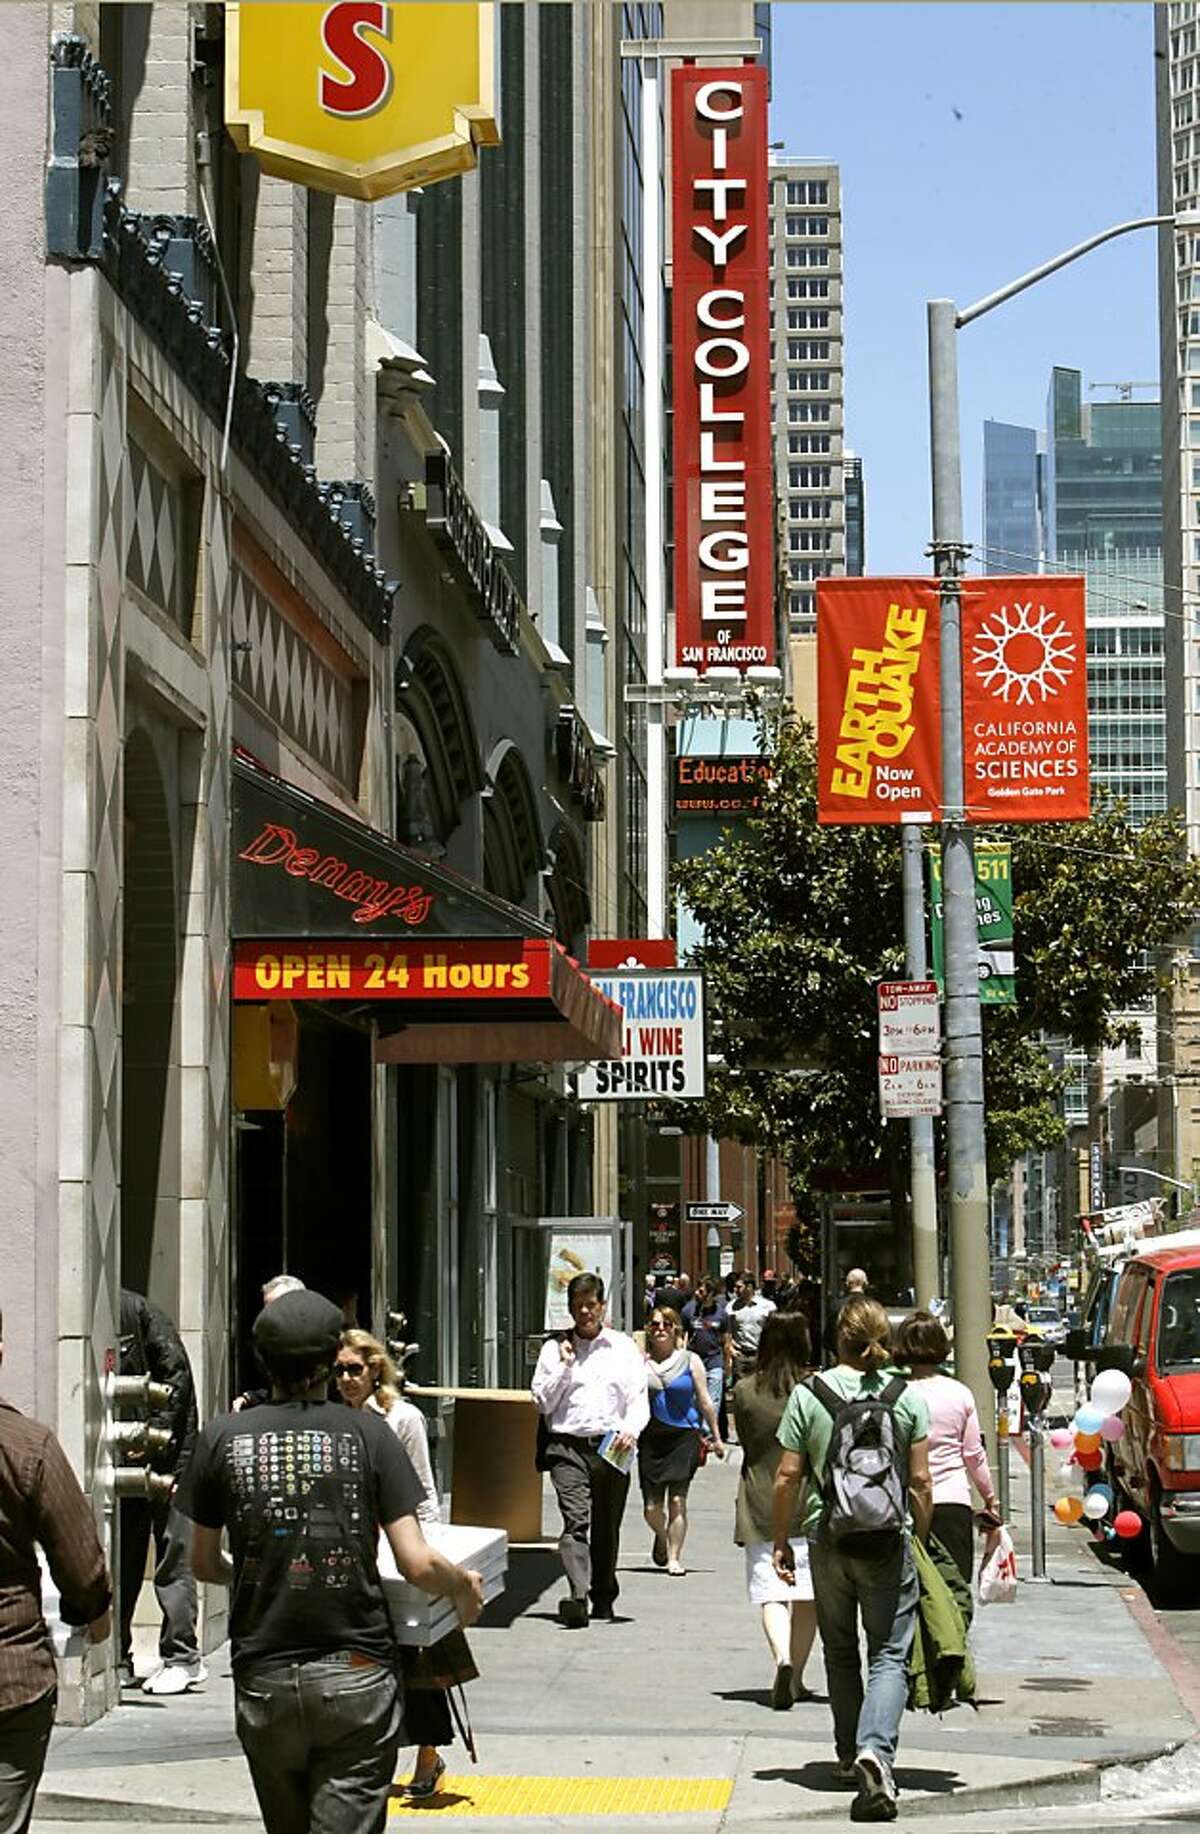 The downtown campus of the City College of San Francisco on the corner of 4th and Mission Sts., on Thursday May 31, 2012, in San Francisco, Ca.  